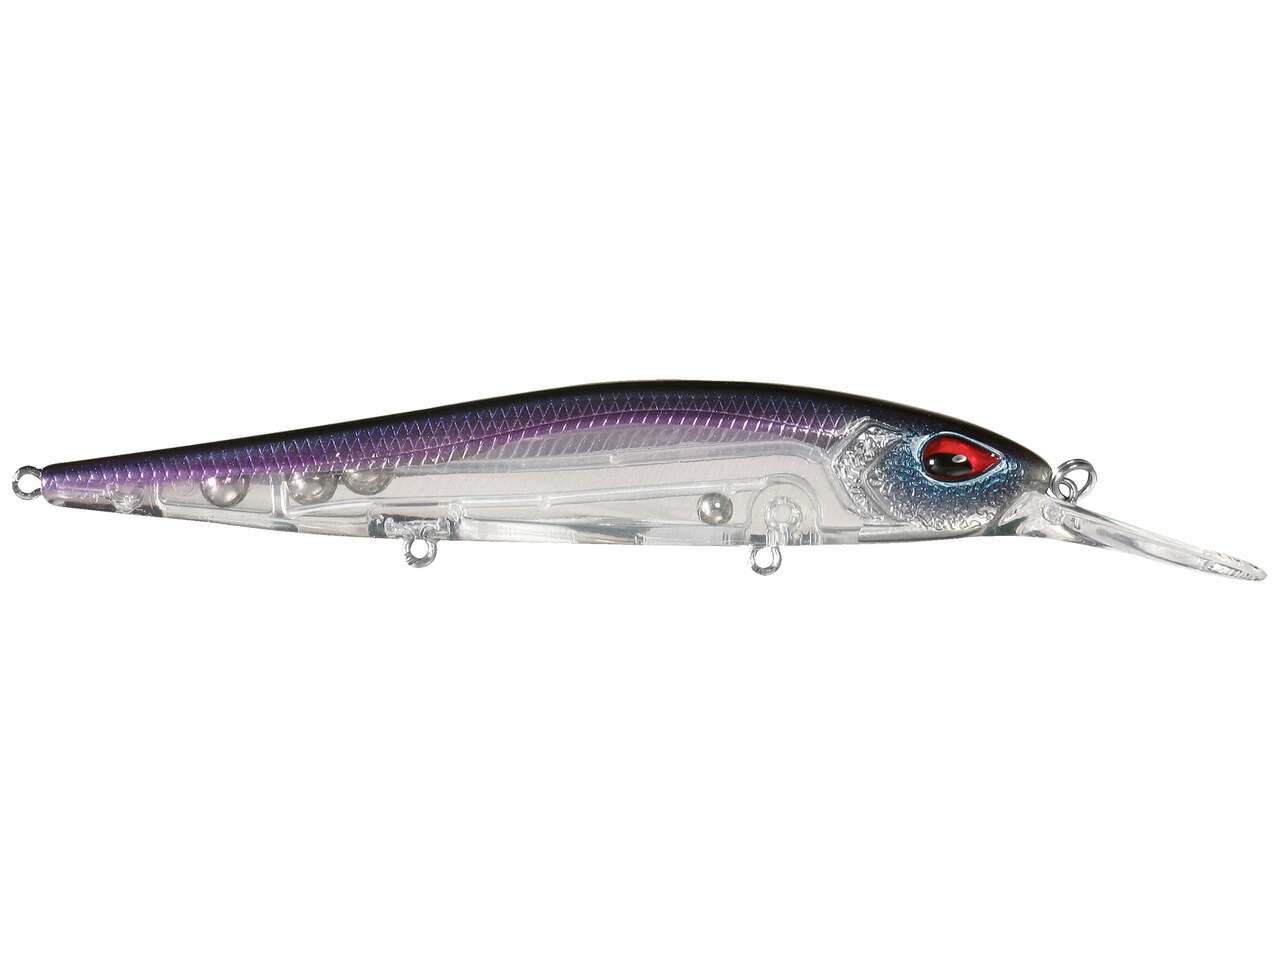 The 13 Fishing Whipper Snapper Jerkbait delivers all the attributes you could ever want in a premium jerkbait but at an unbeatable price point to give anglers the best value on the market. Built with an internal weight transfer system and a carefully designed slim profile, the 13 Fishing Whipper Snapper Jerkbait provides extremely long casts, as well as, a tantalizing slashing and darting action with each twitch of the rod tip to make fish strike out of pure instincts.